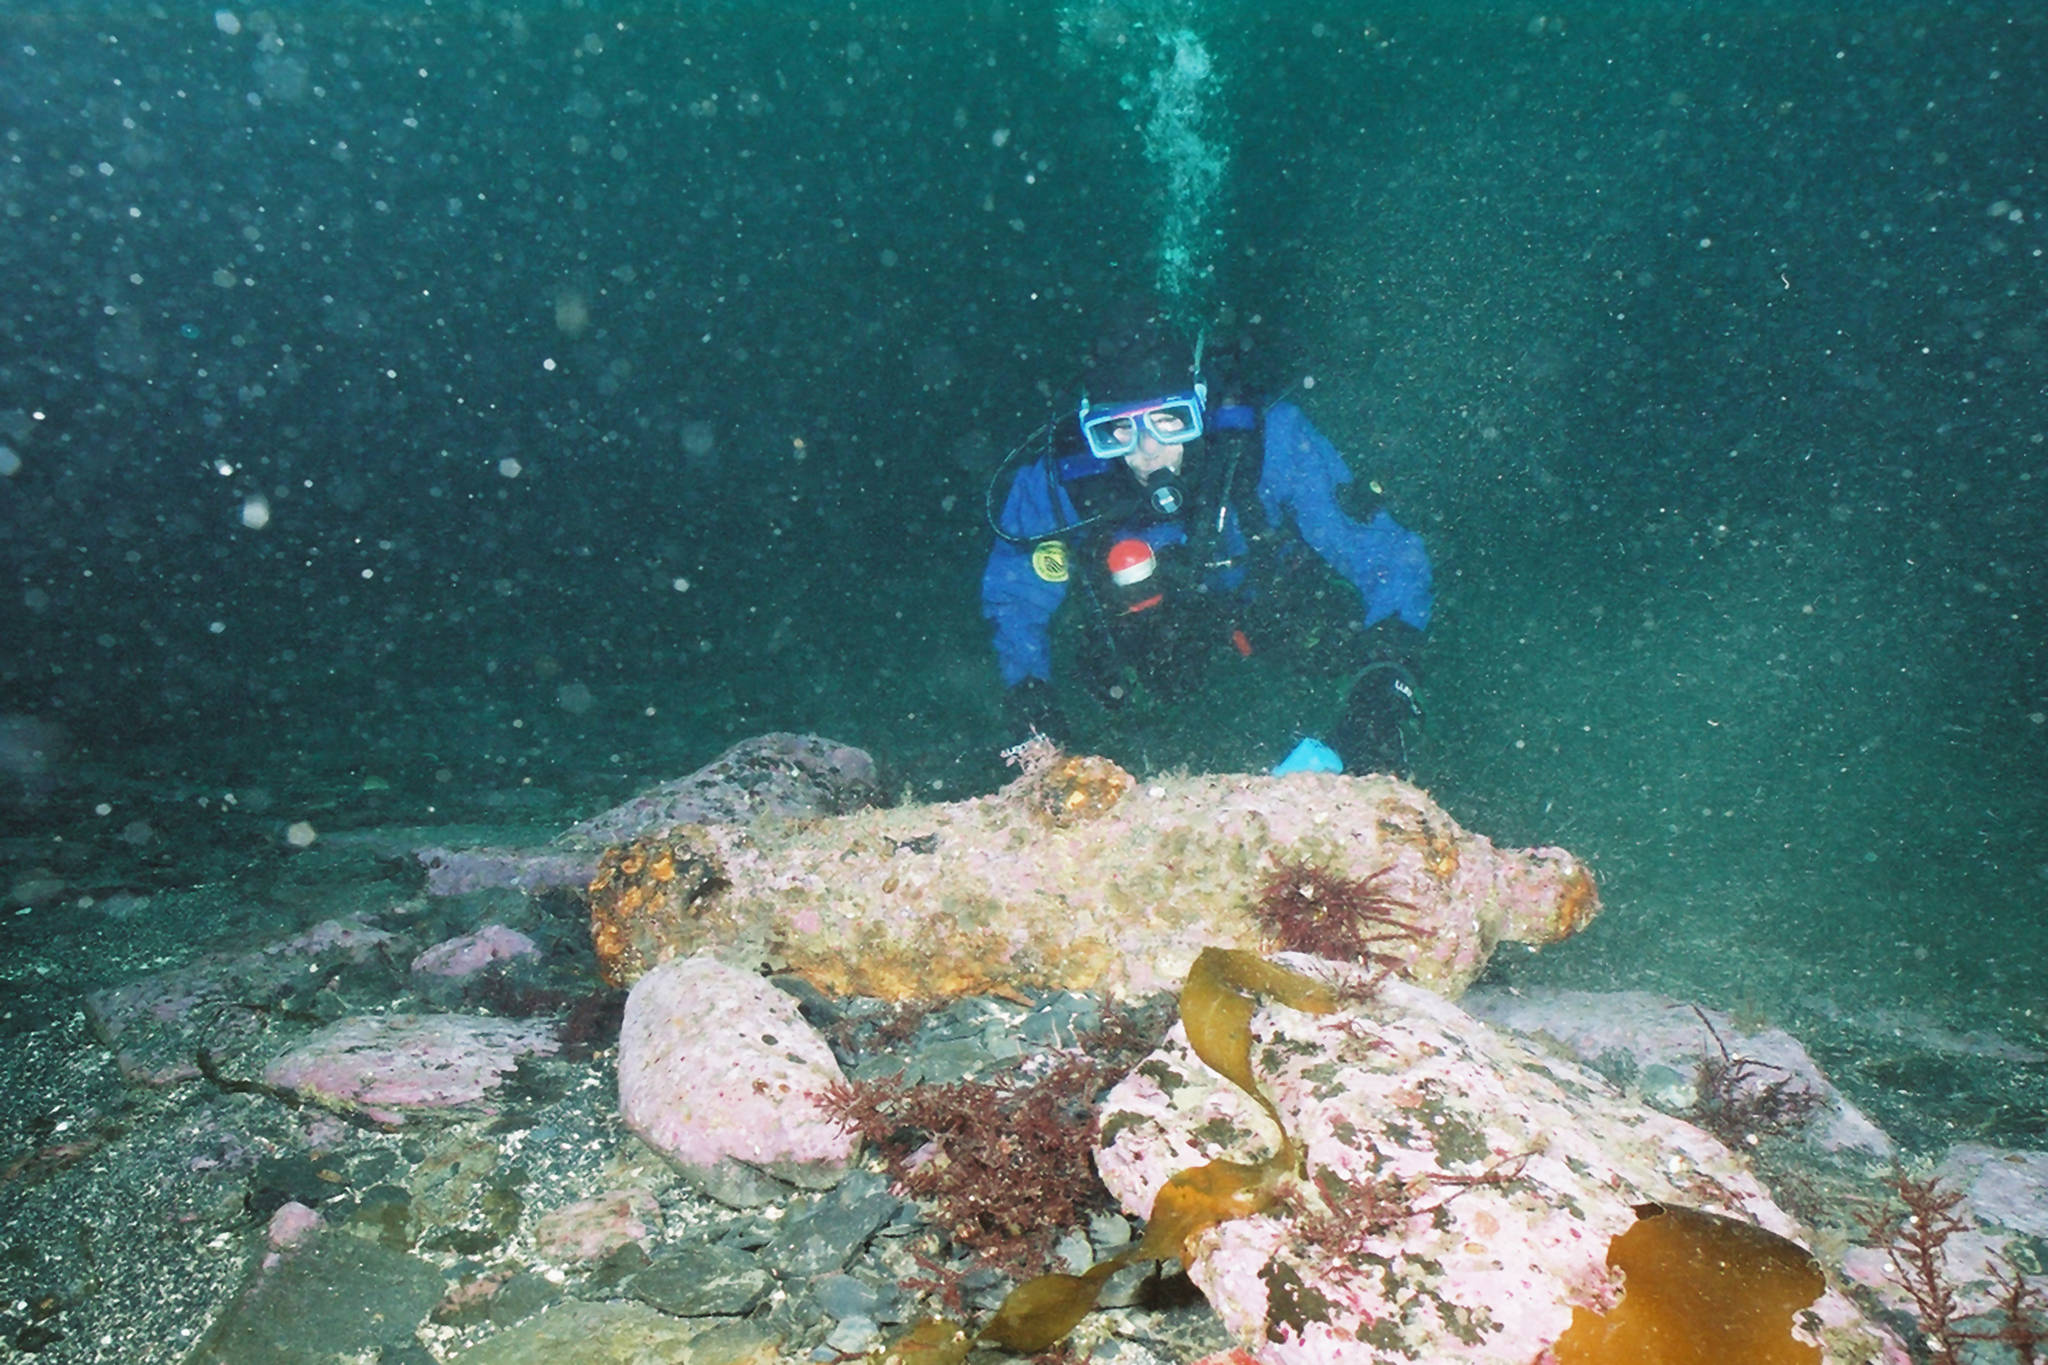 Brad Stevens searches through the wreckage of the Kad’yak, a Russian ship that sank while hauling ice and came to a rest near Spruce Island. Stevens said he’d like to go back to the site and make diving maps for recreational divers. (Courtesy Photo | Brad Stevens)